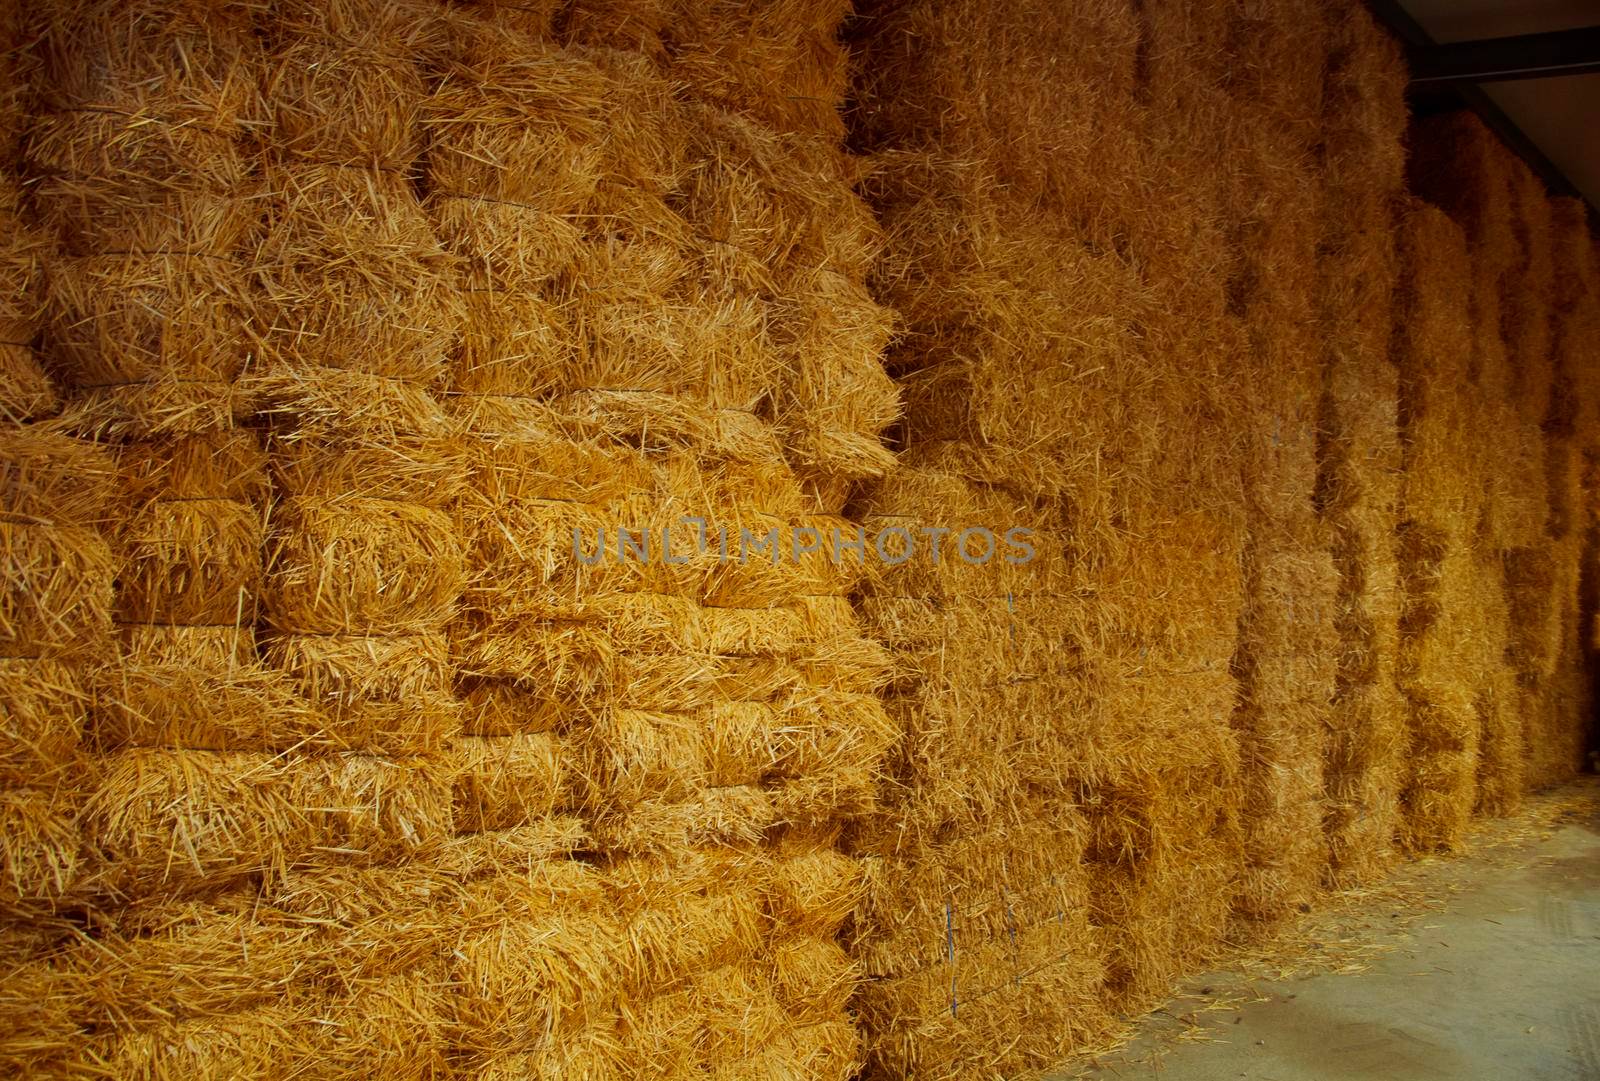 Wall of big packs of hay in the storehouse, Spain